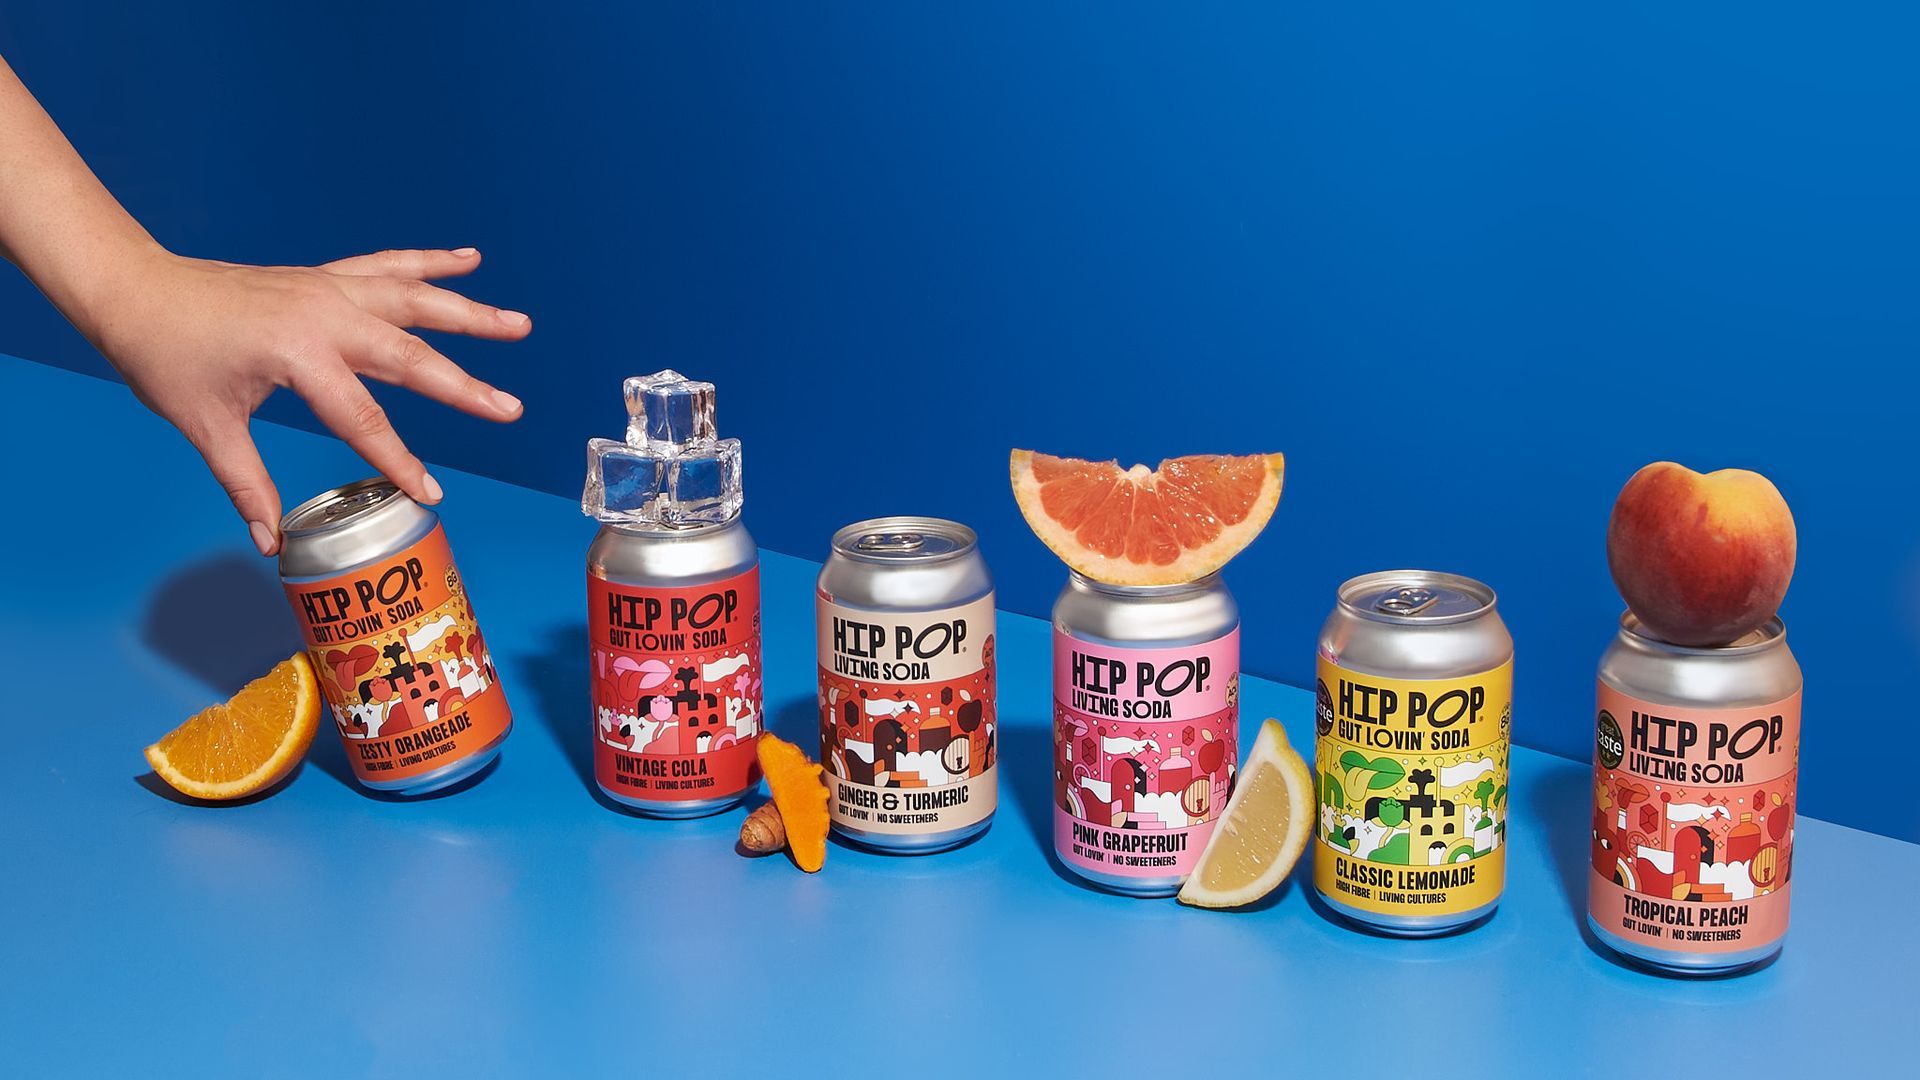 nontox partner with hip pop
